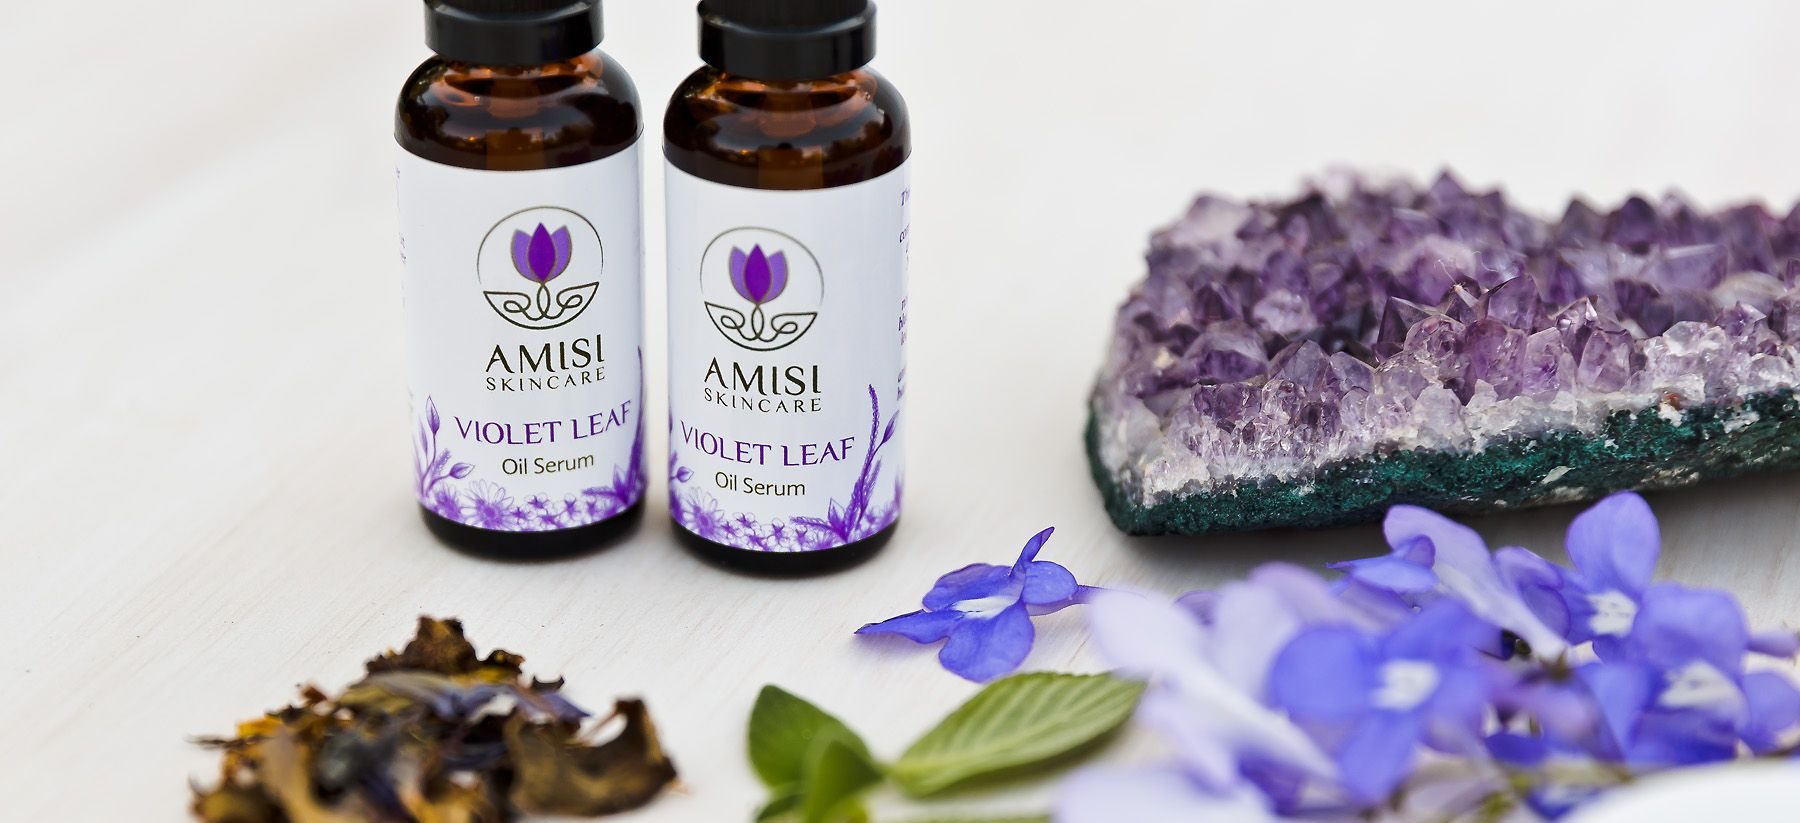 Is Amisi cruelty free?